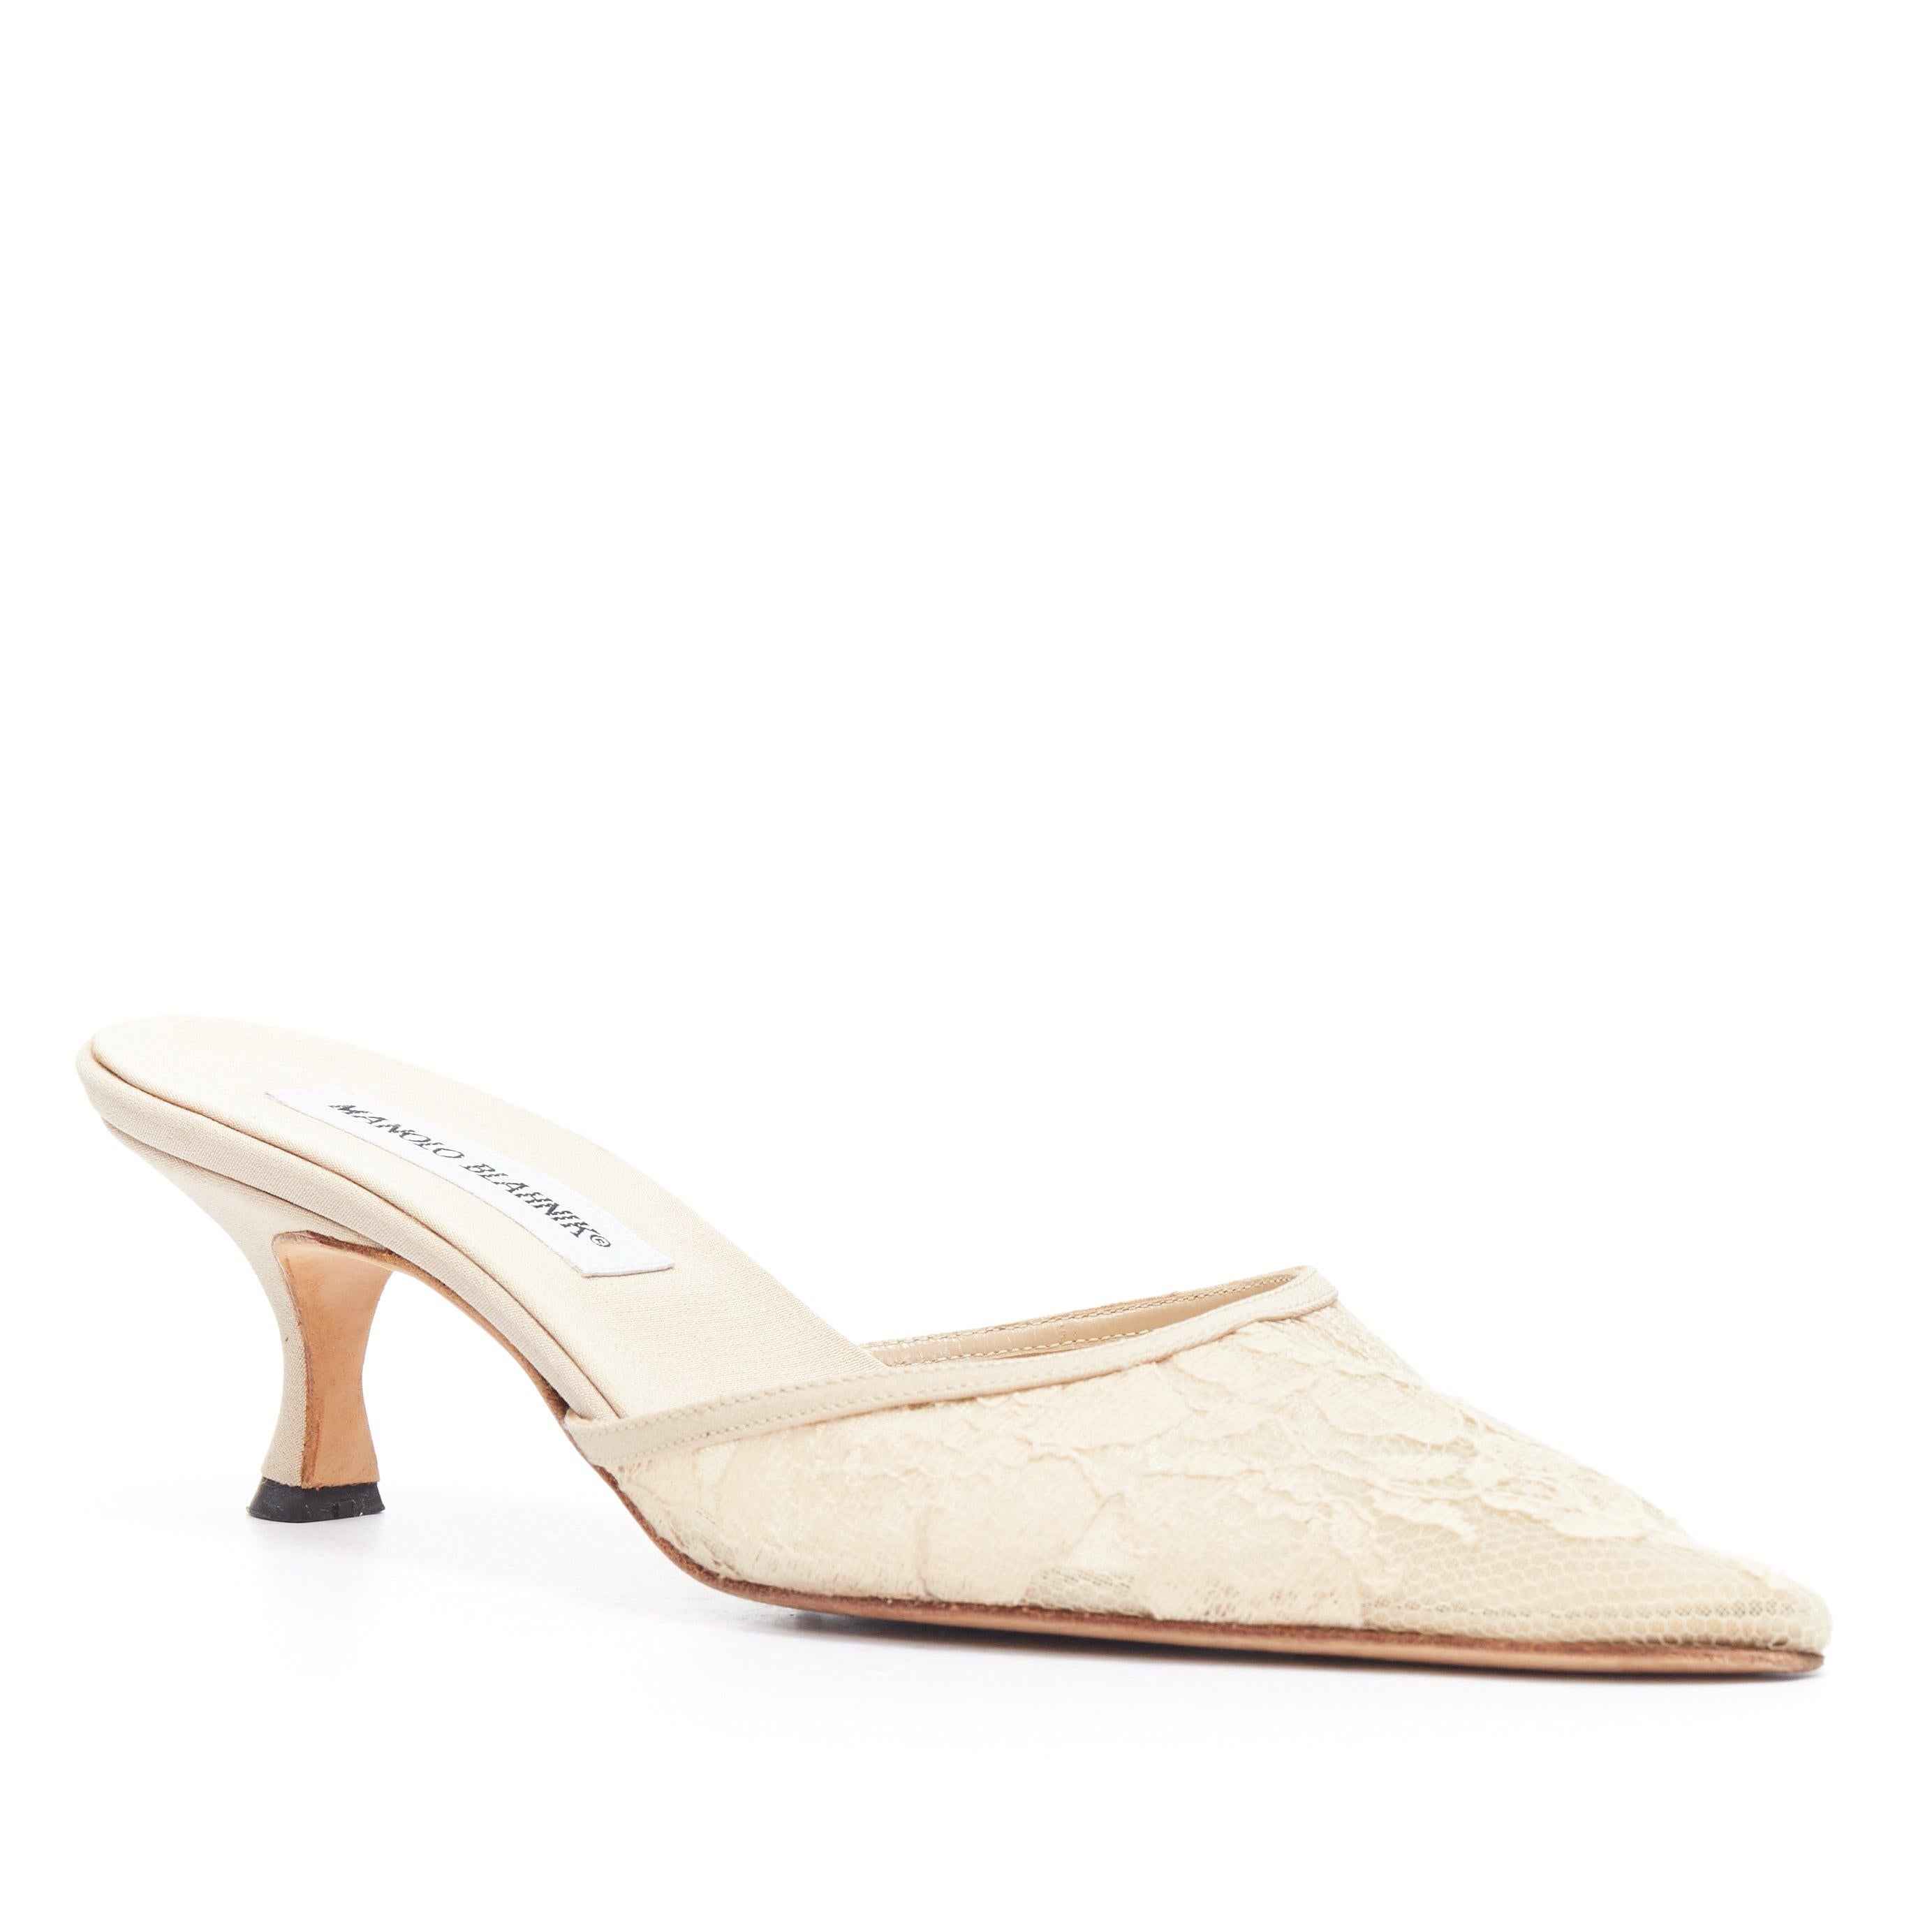 MANOLO BLAHNIK nude beige floral lace applique mesh pointy mid heel mule EU38
Reference: CC/ASCW00270
Brand: Manolo Blahnik
Material: Fabric
Color: Beige
Pattern: Solid
Lining: Leather
Extra Details: Floral lace applique on mesh. Pointed toe. Mid